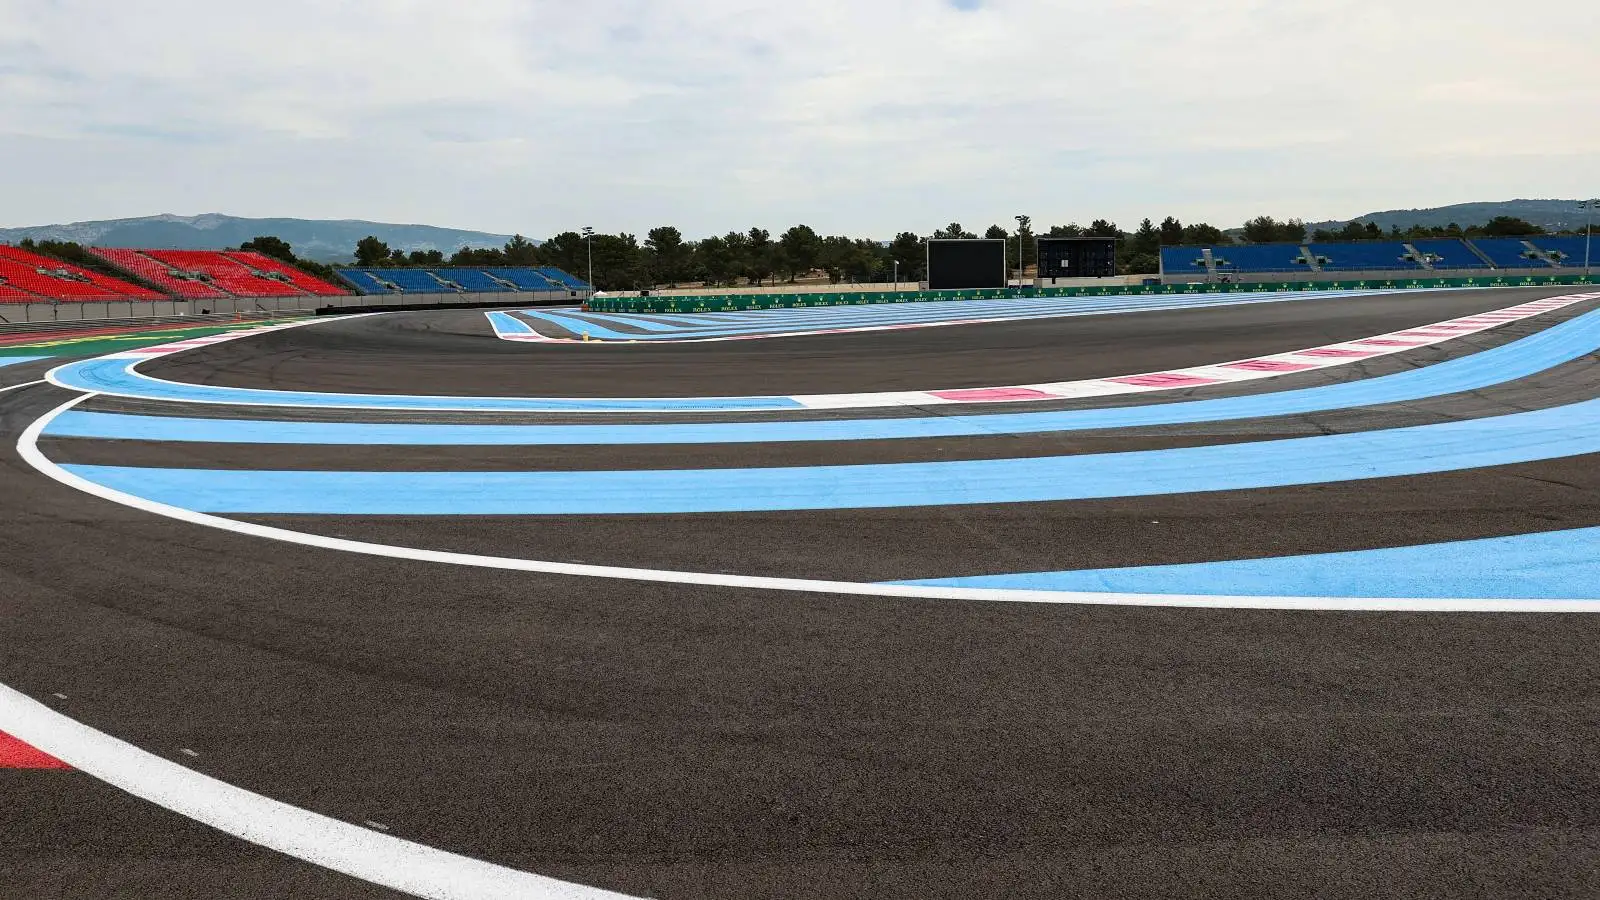 Paul Ricard with no cars or fans. France, June 2021.